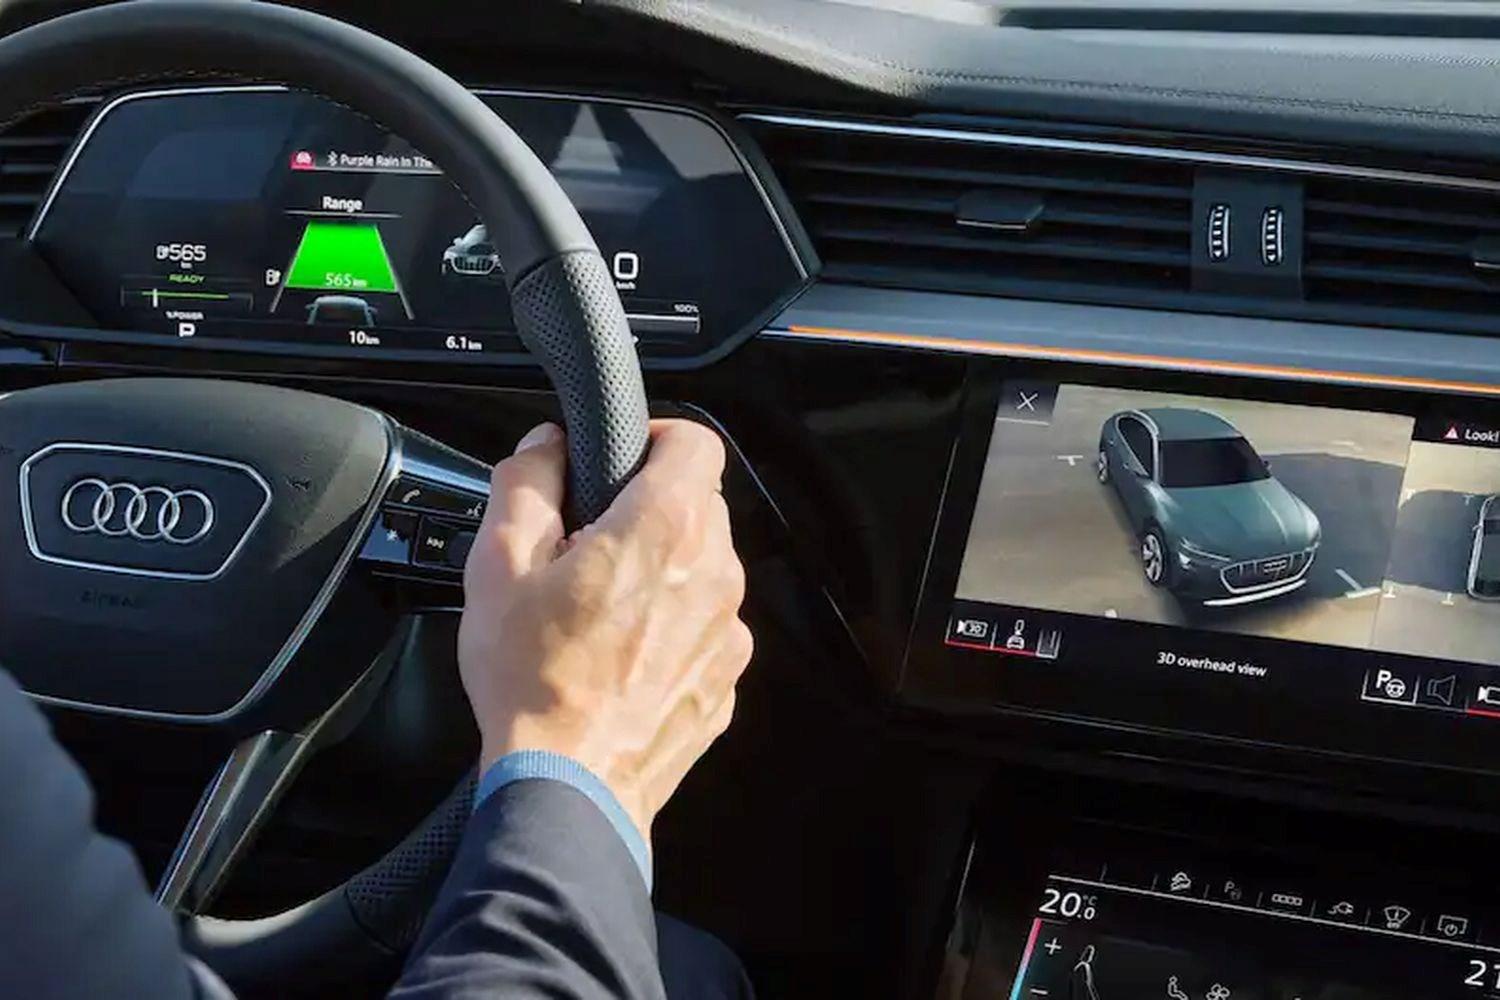 Close-up of customer driving an Audi vehicle with the infotainment system in view